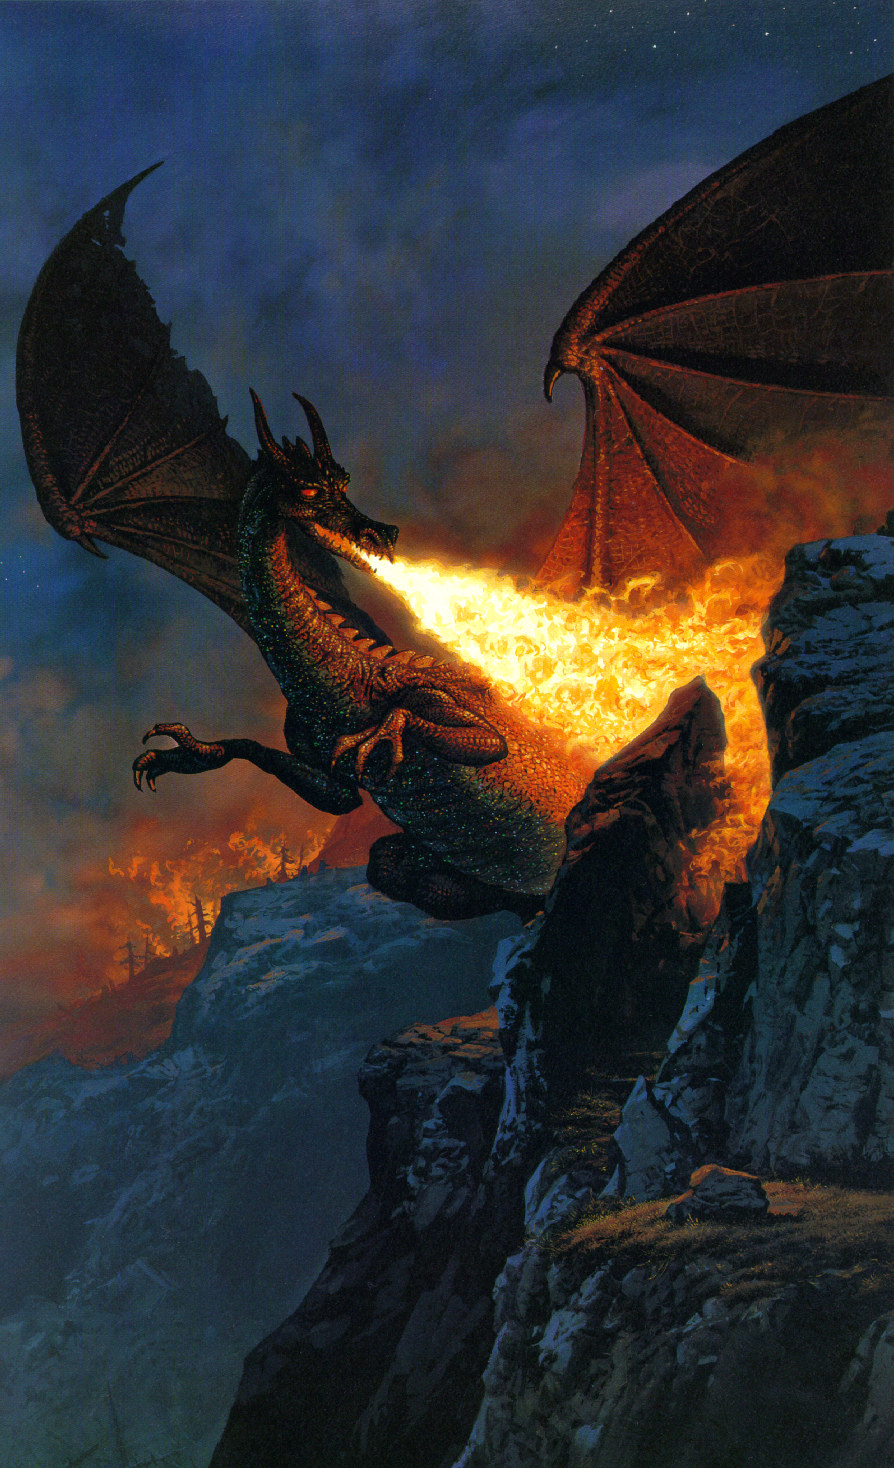 Ted Nasmith | Le Hobbit | Scouring the Mountain